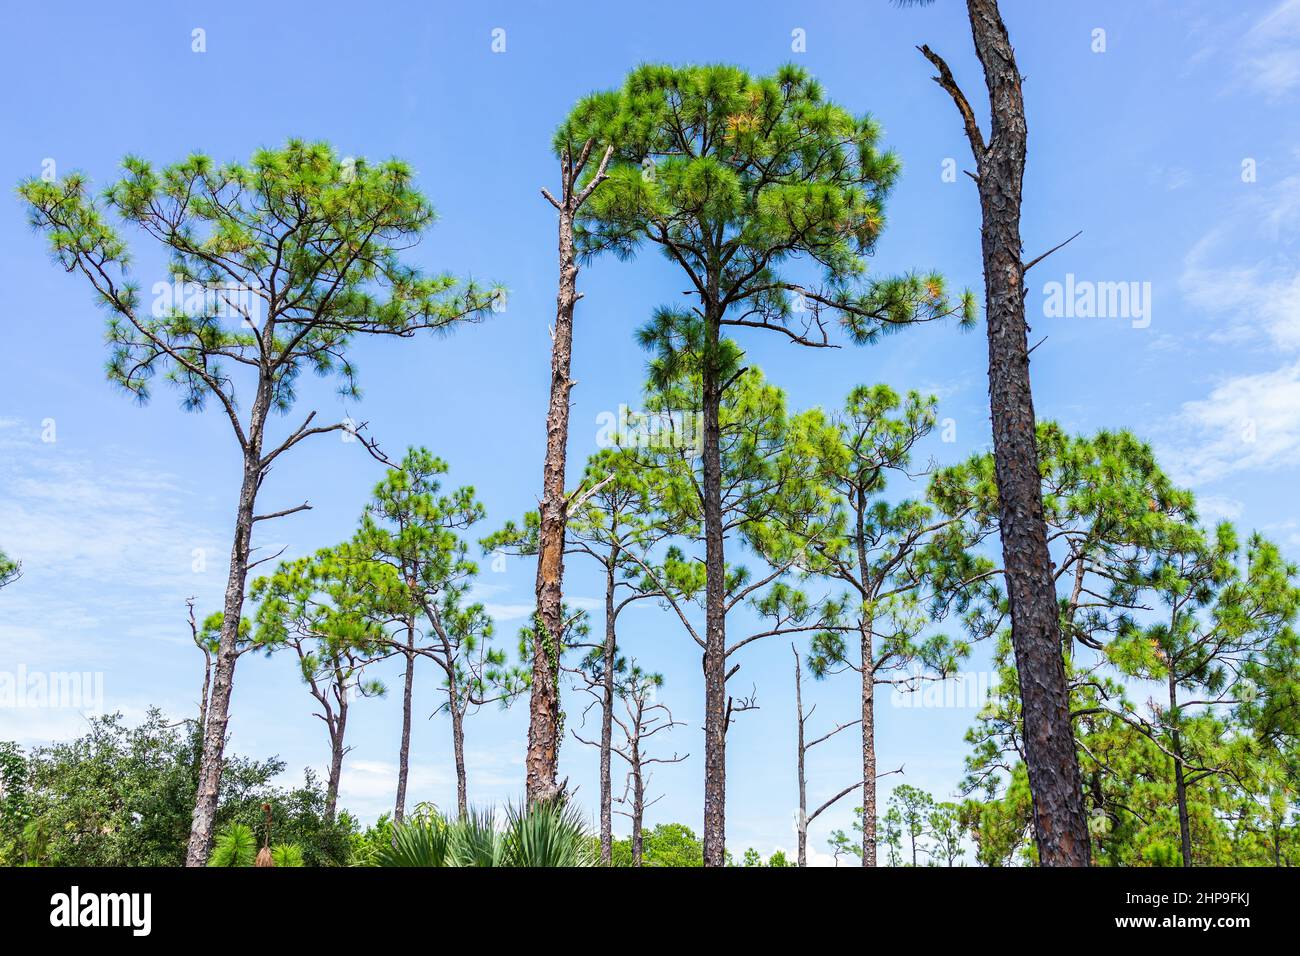 Naples, Florida Coller County Gordon River Greenway Park with forest landscape summer view of longleaf pine trees in blue sky Stock Photo